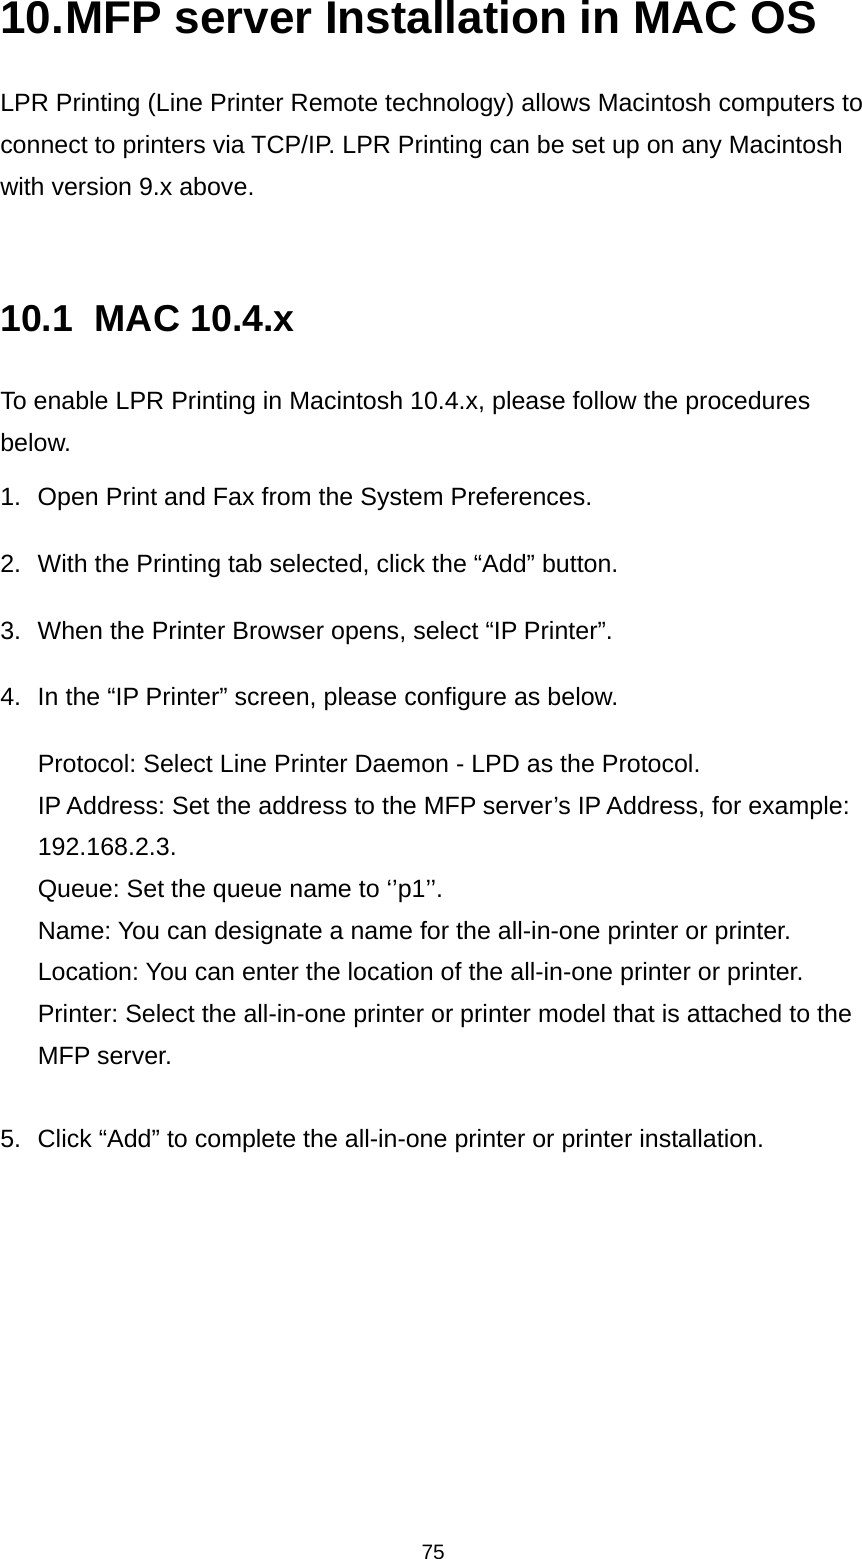 75 10. MFP server Installation in MAC OS LPR Printing (Line Printer Remote technology) allows Macintosh computers to connect to printers via TCP/IP. LPR Printing can be set up on any Macintosh with version 9.x above.   10.1 MAC 10.4.x To enable LPR Printing in Macintosh 10.4.x, please follow the procedures below. 1.  Open Print and Fax from the System Preferences. 2.  With the Printing tab selected, click the “Add” button. 3.  When the Printer Browser opens, select “IP Printer”. 4.  In the “IP Printer” screen, please configure as below. Protocol: Select Line Printer Daemon - LPD as the Protocol. IP Address: Set the address to the MFP server’s IP Address, for example: 192.168.2.3.  Queue: Set the queue name to ‘’p1’’. Name: You can designate a name for the all-in-one printer or printer. Location: You can enter the location of the all-in-one printer or printer. Printer: Select the all-in-one printer or printer model that is attached to the MFP server.  5.  Click “Add” to complete the all-in-one printer or printer installation.        